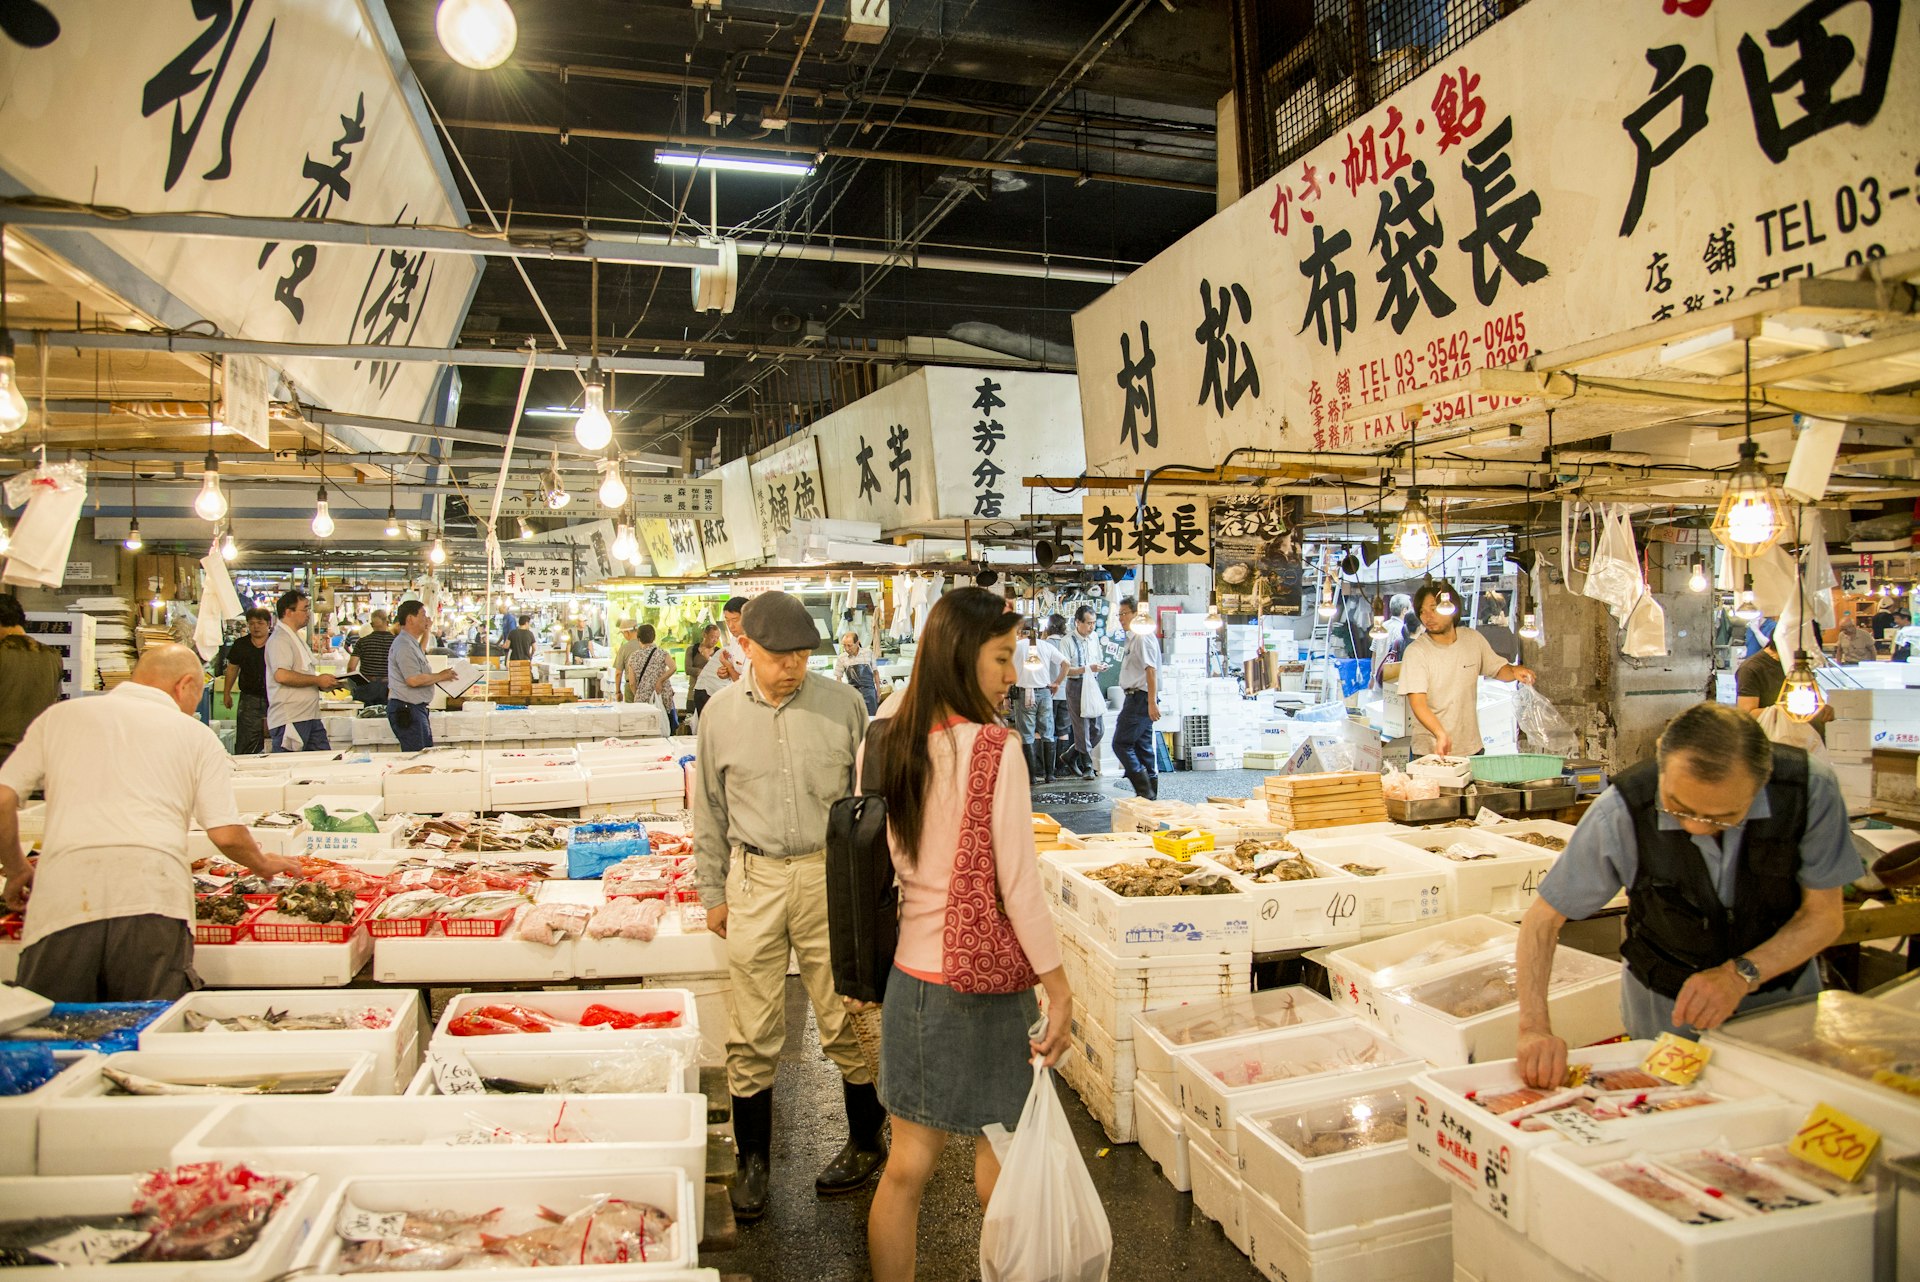 Merchants selling seafood in the famous Tsukiji fish market, Tokyo